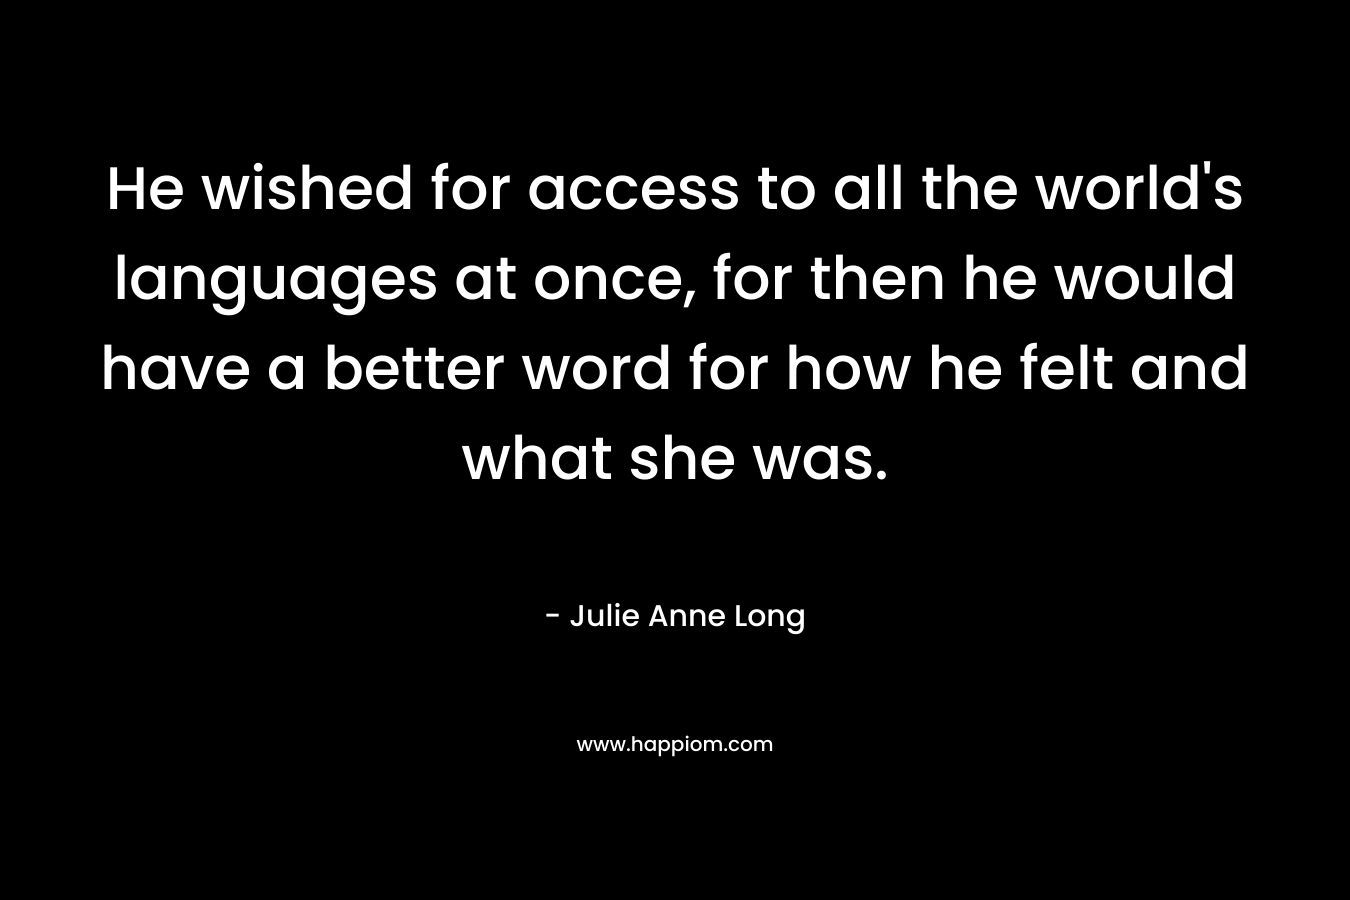 He wished for access to all the world’s languages at once, for then he would have a better word for how he felt and what she was. – Julie Anne Long